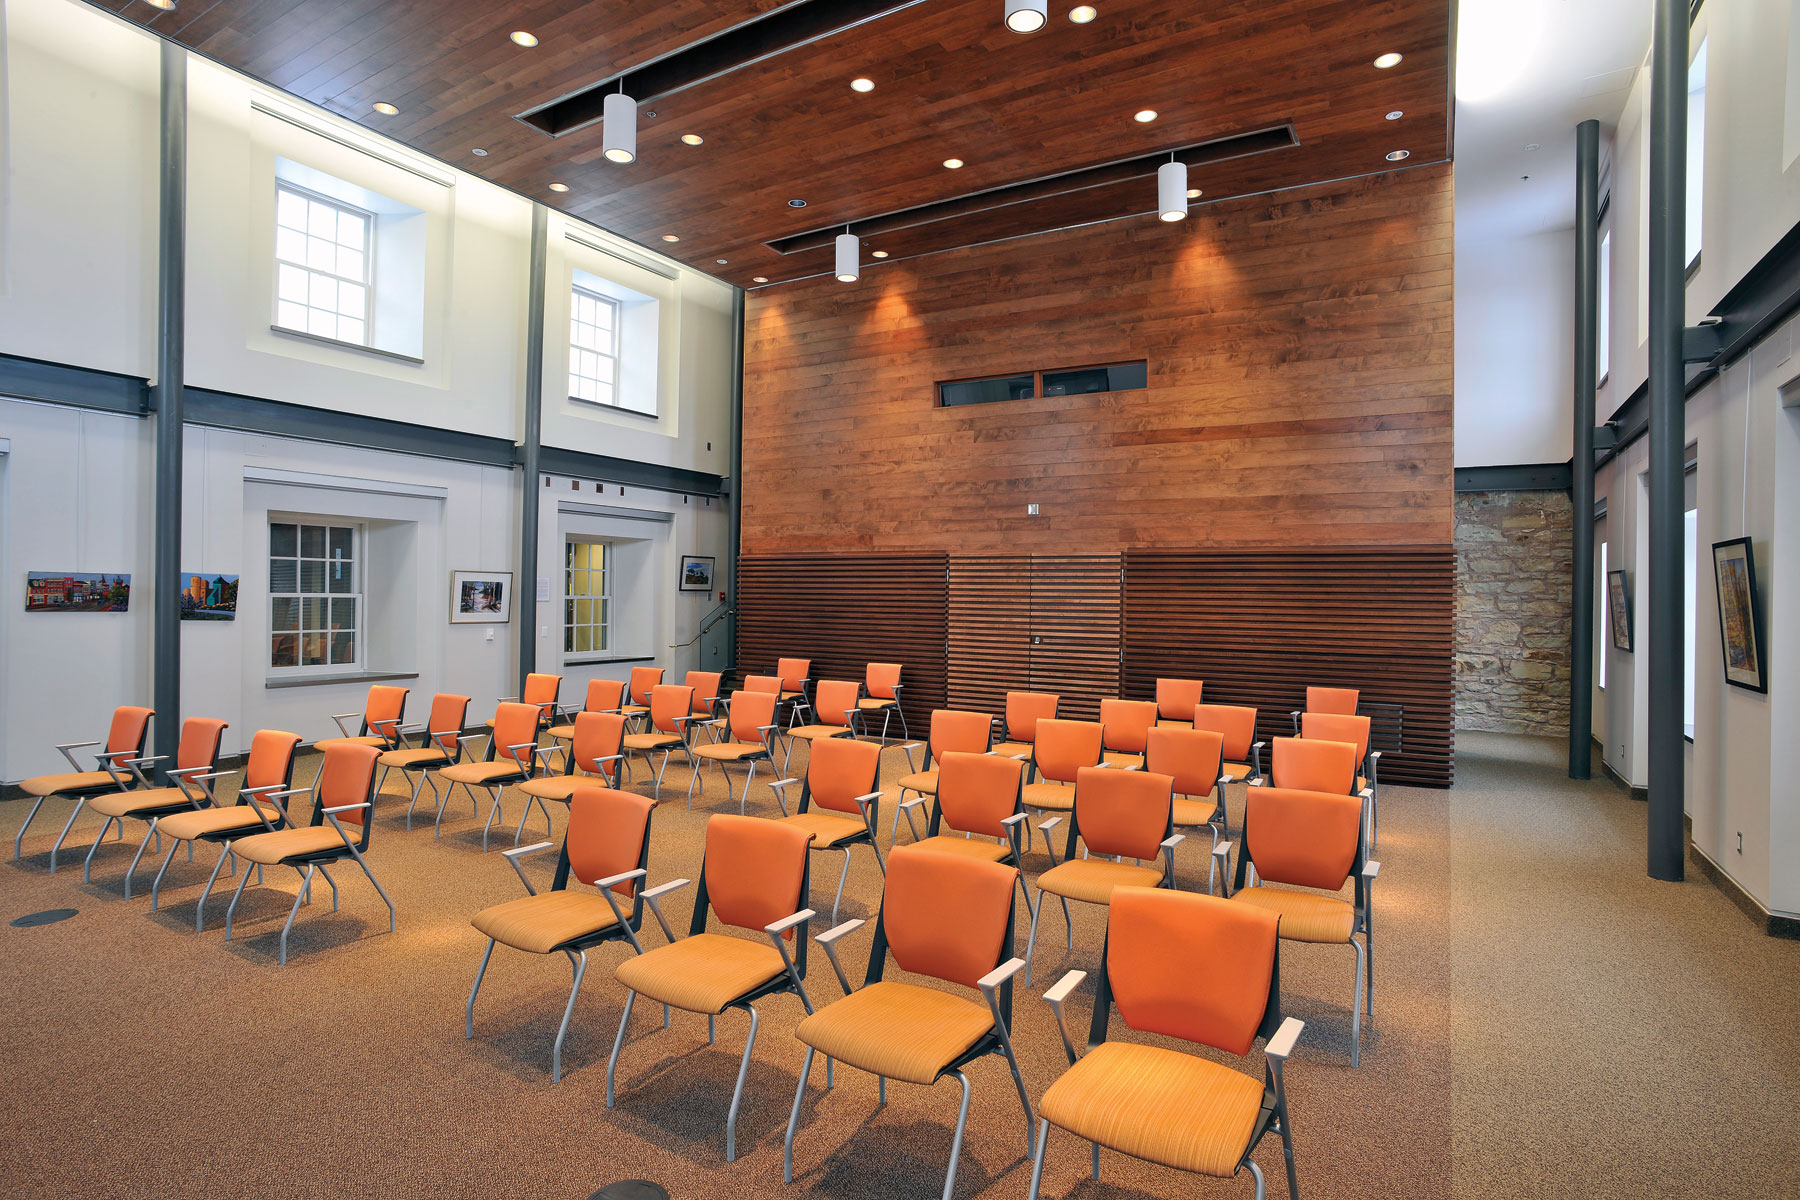 Double height public Town Hall space with windows, exposed steel beams, plank wood wall and ceiling feature, and orange chairs